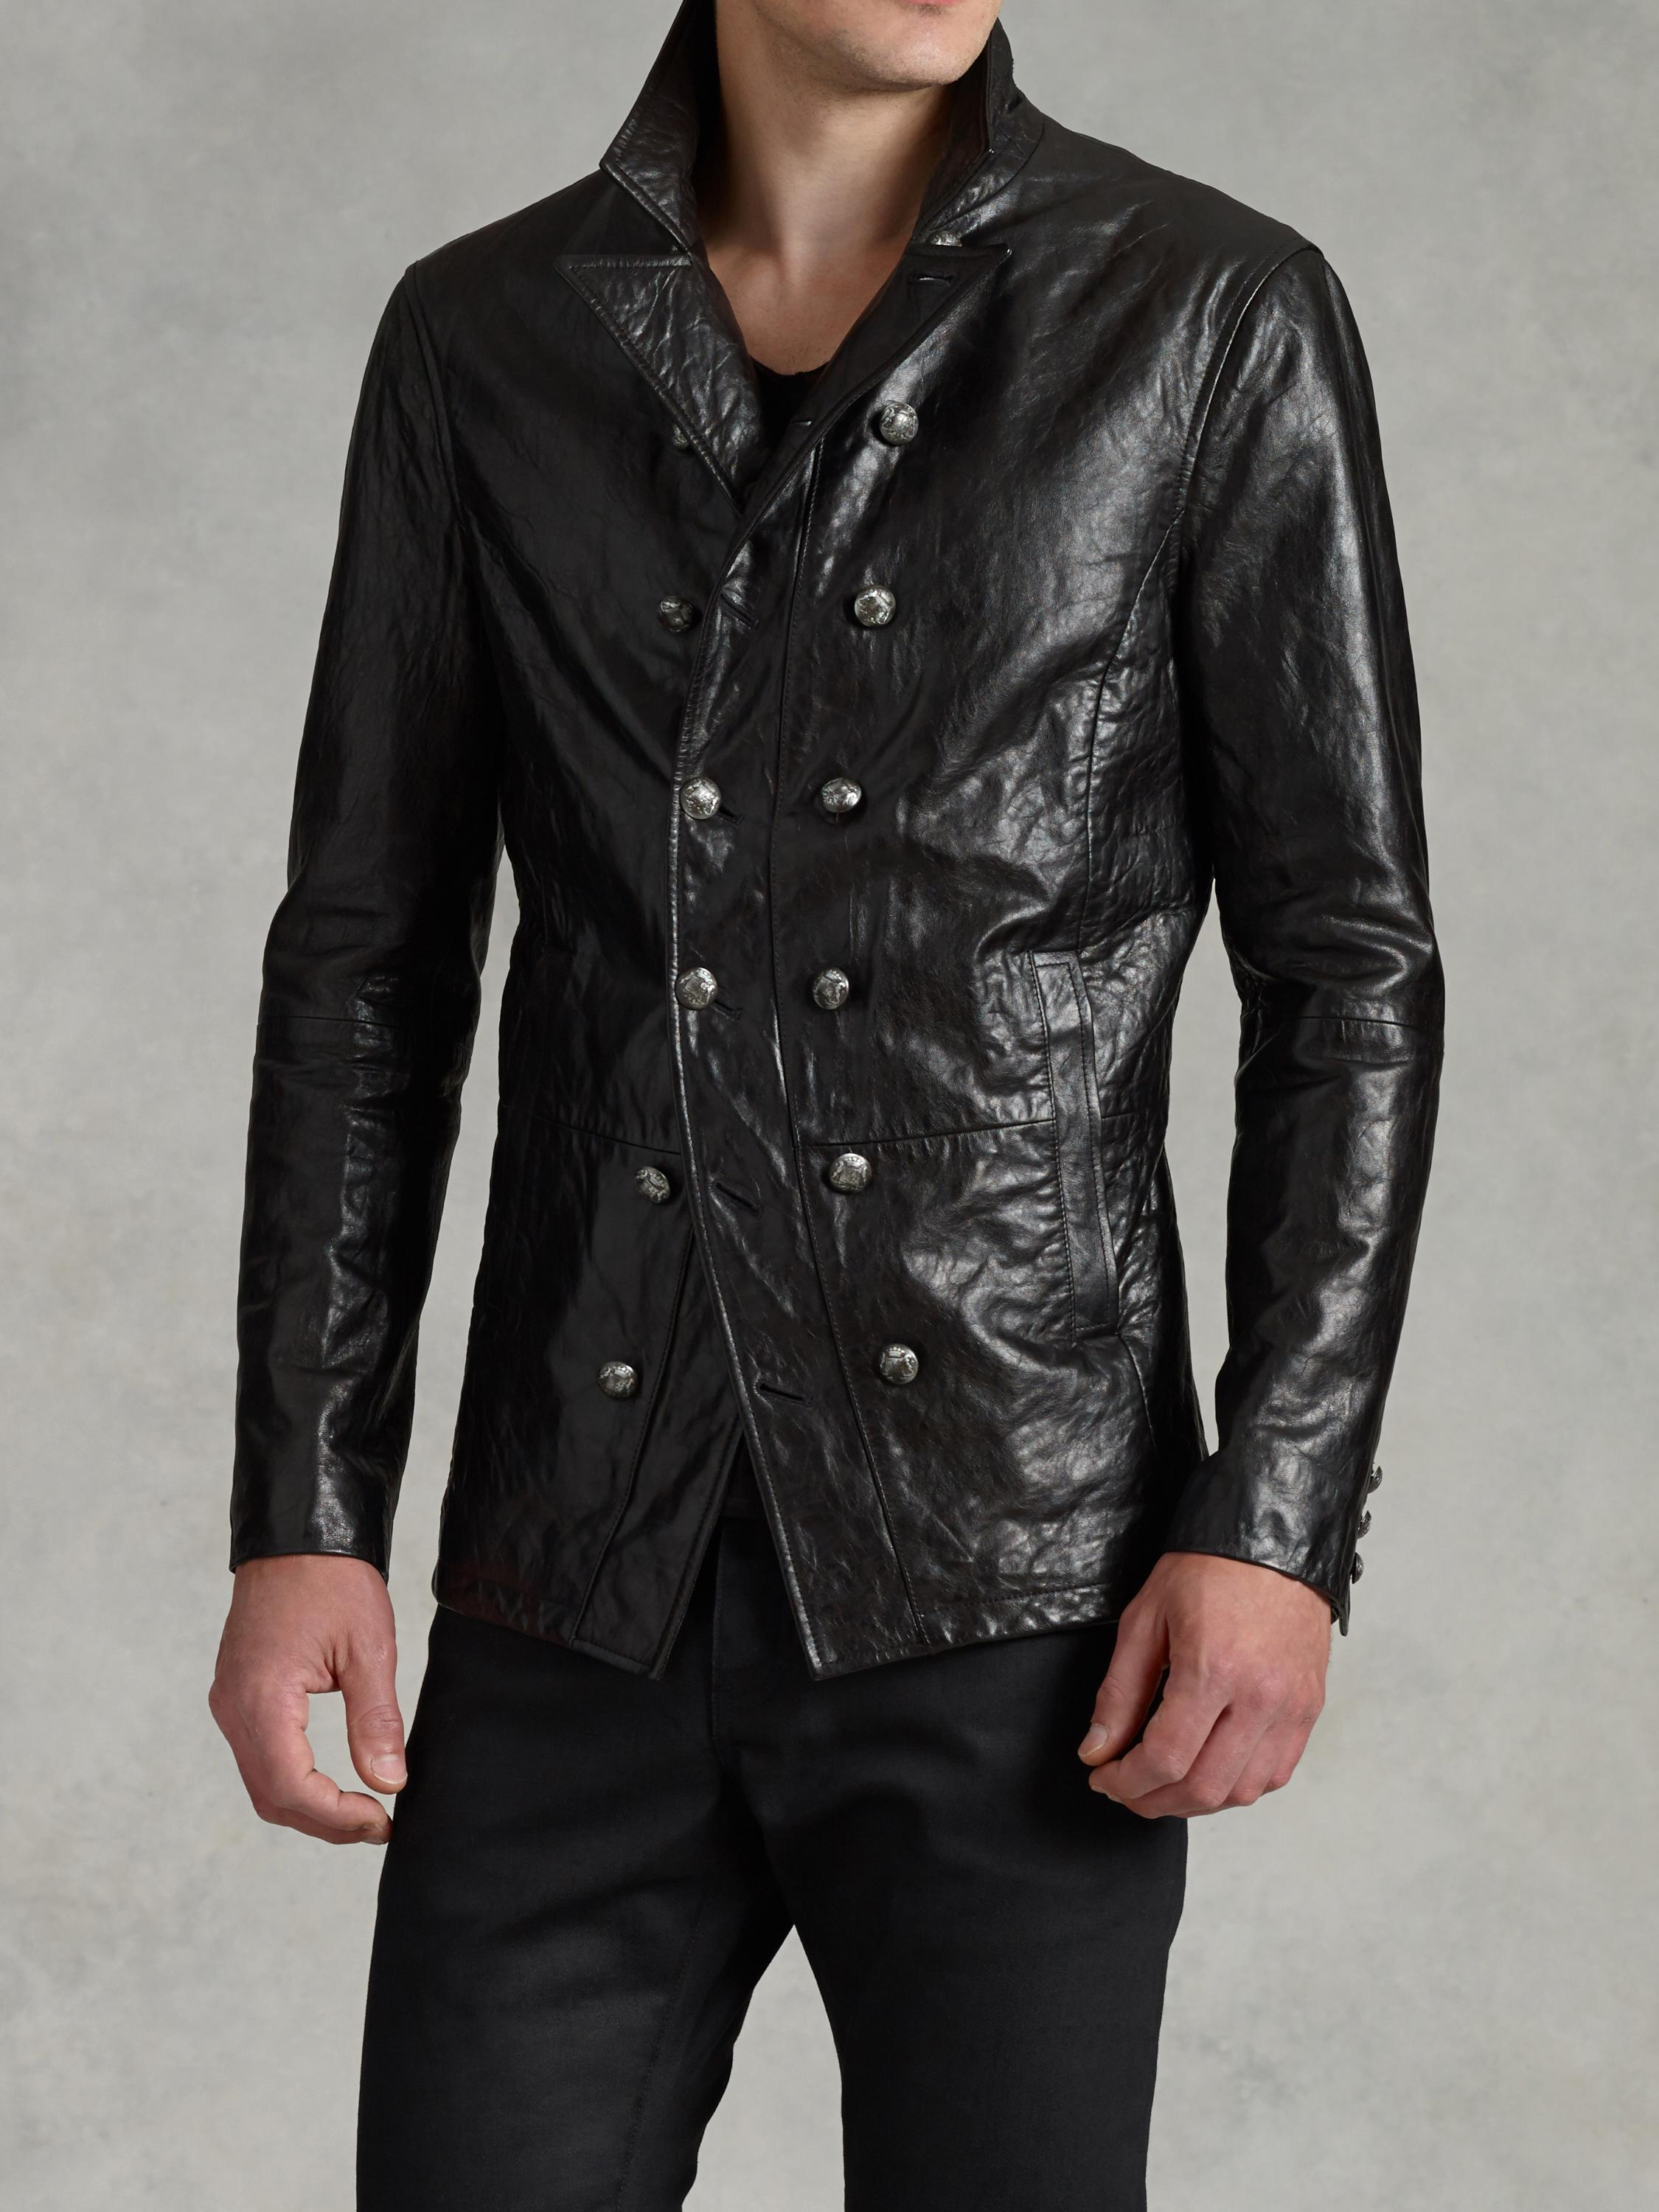 John Varvatos Double Breasted Leather Jacket in Black for Men - Lyst